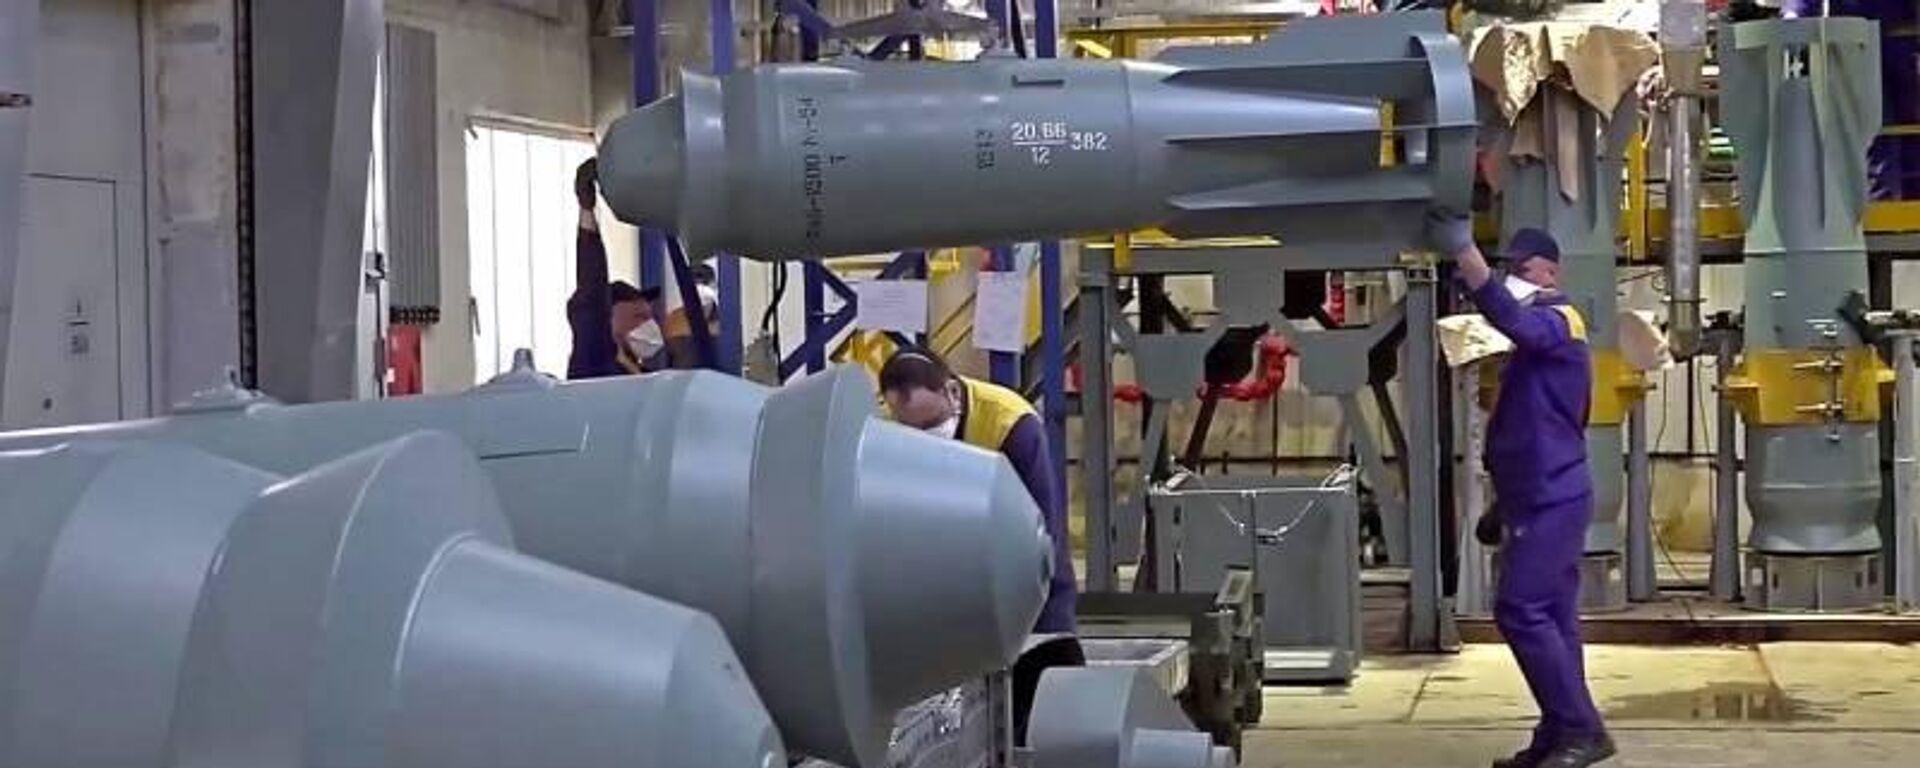 Screengrab of Russian Defense Ministry video from Sergei Shoigu's tour of a Russian military factory. Image shows FAB-1500 bomb. - Sputnik International, 1920, 11.03.2024